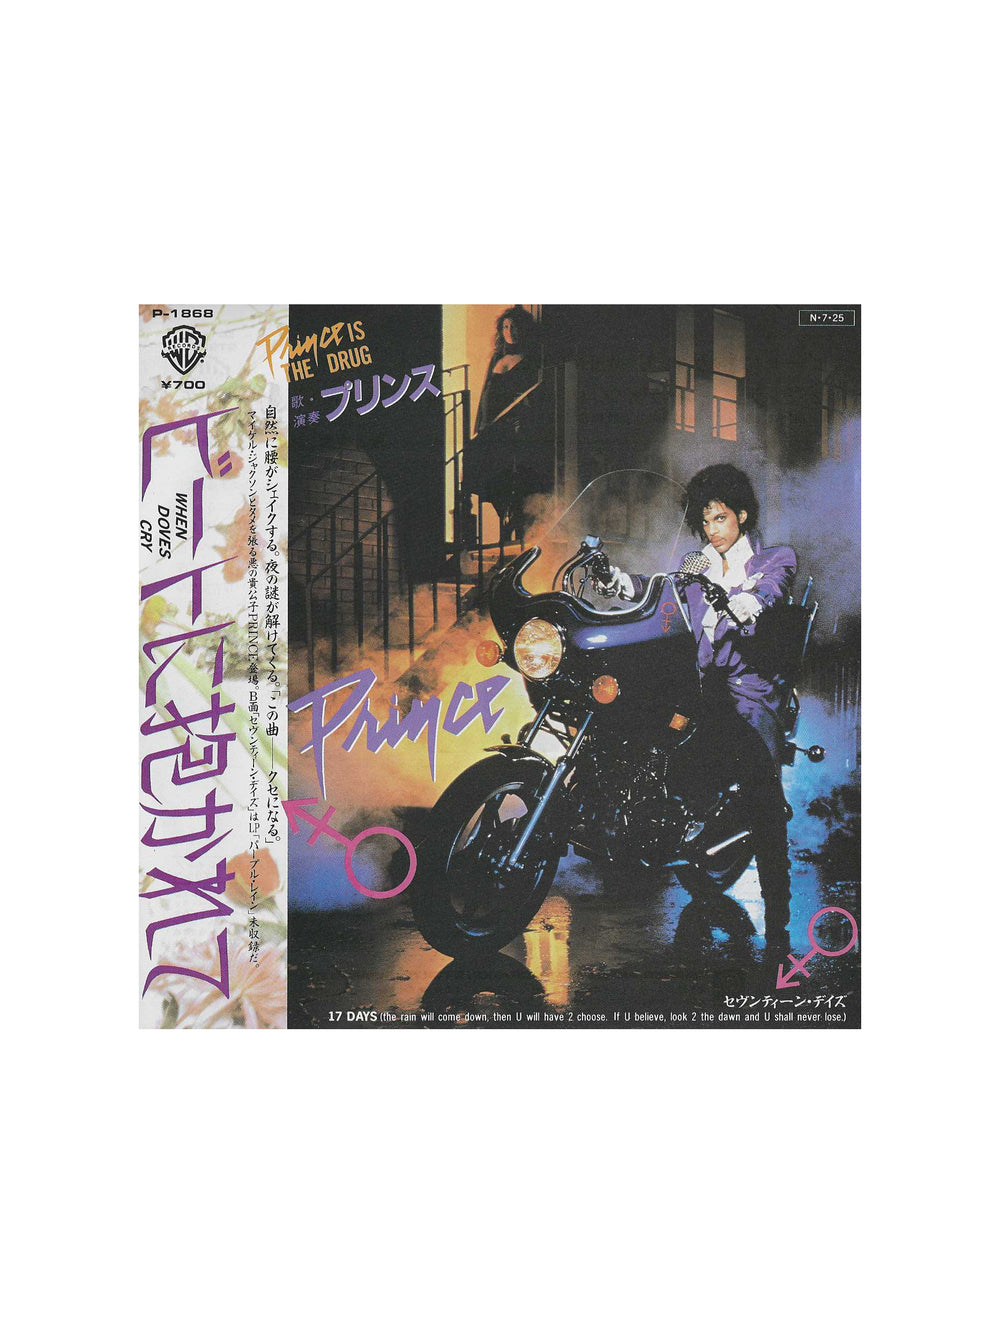 Prince – & The Revolution When Doves Cry 7 Inch Vinyl Single Original Japan Release